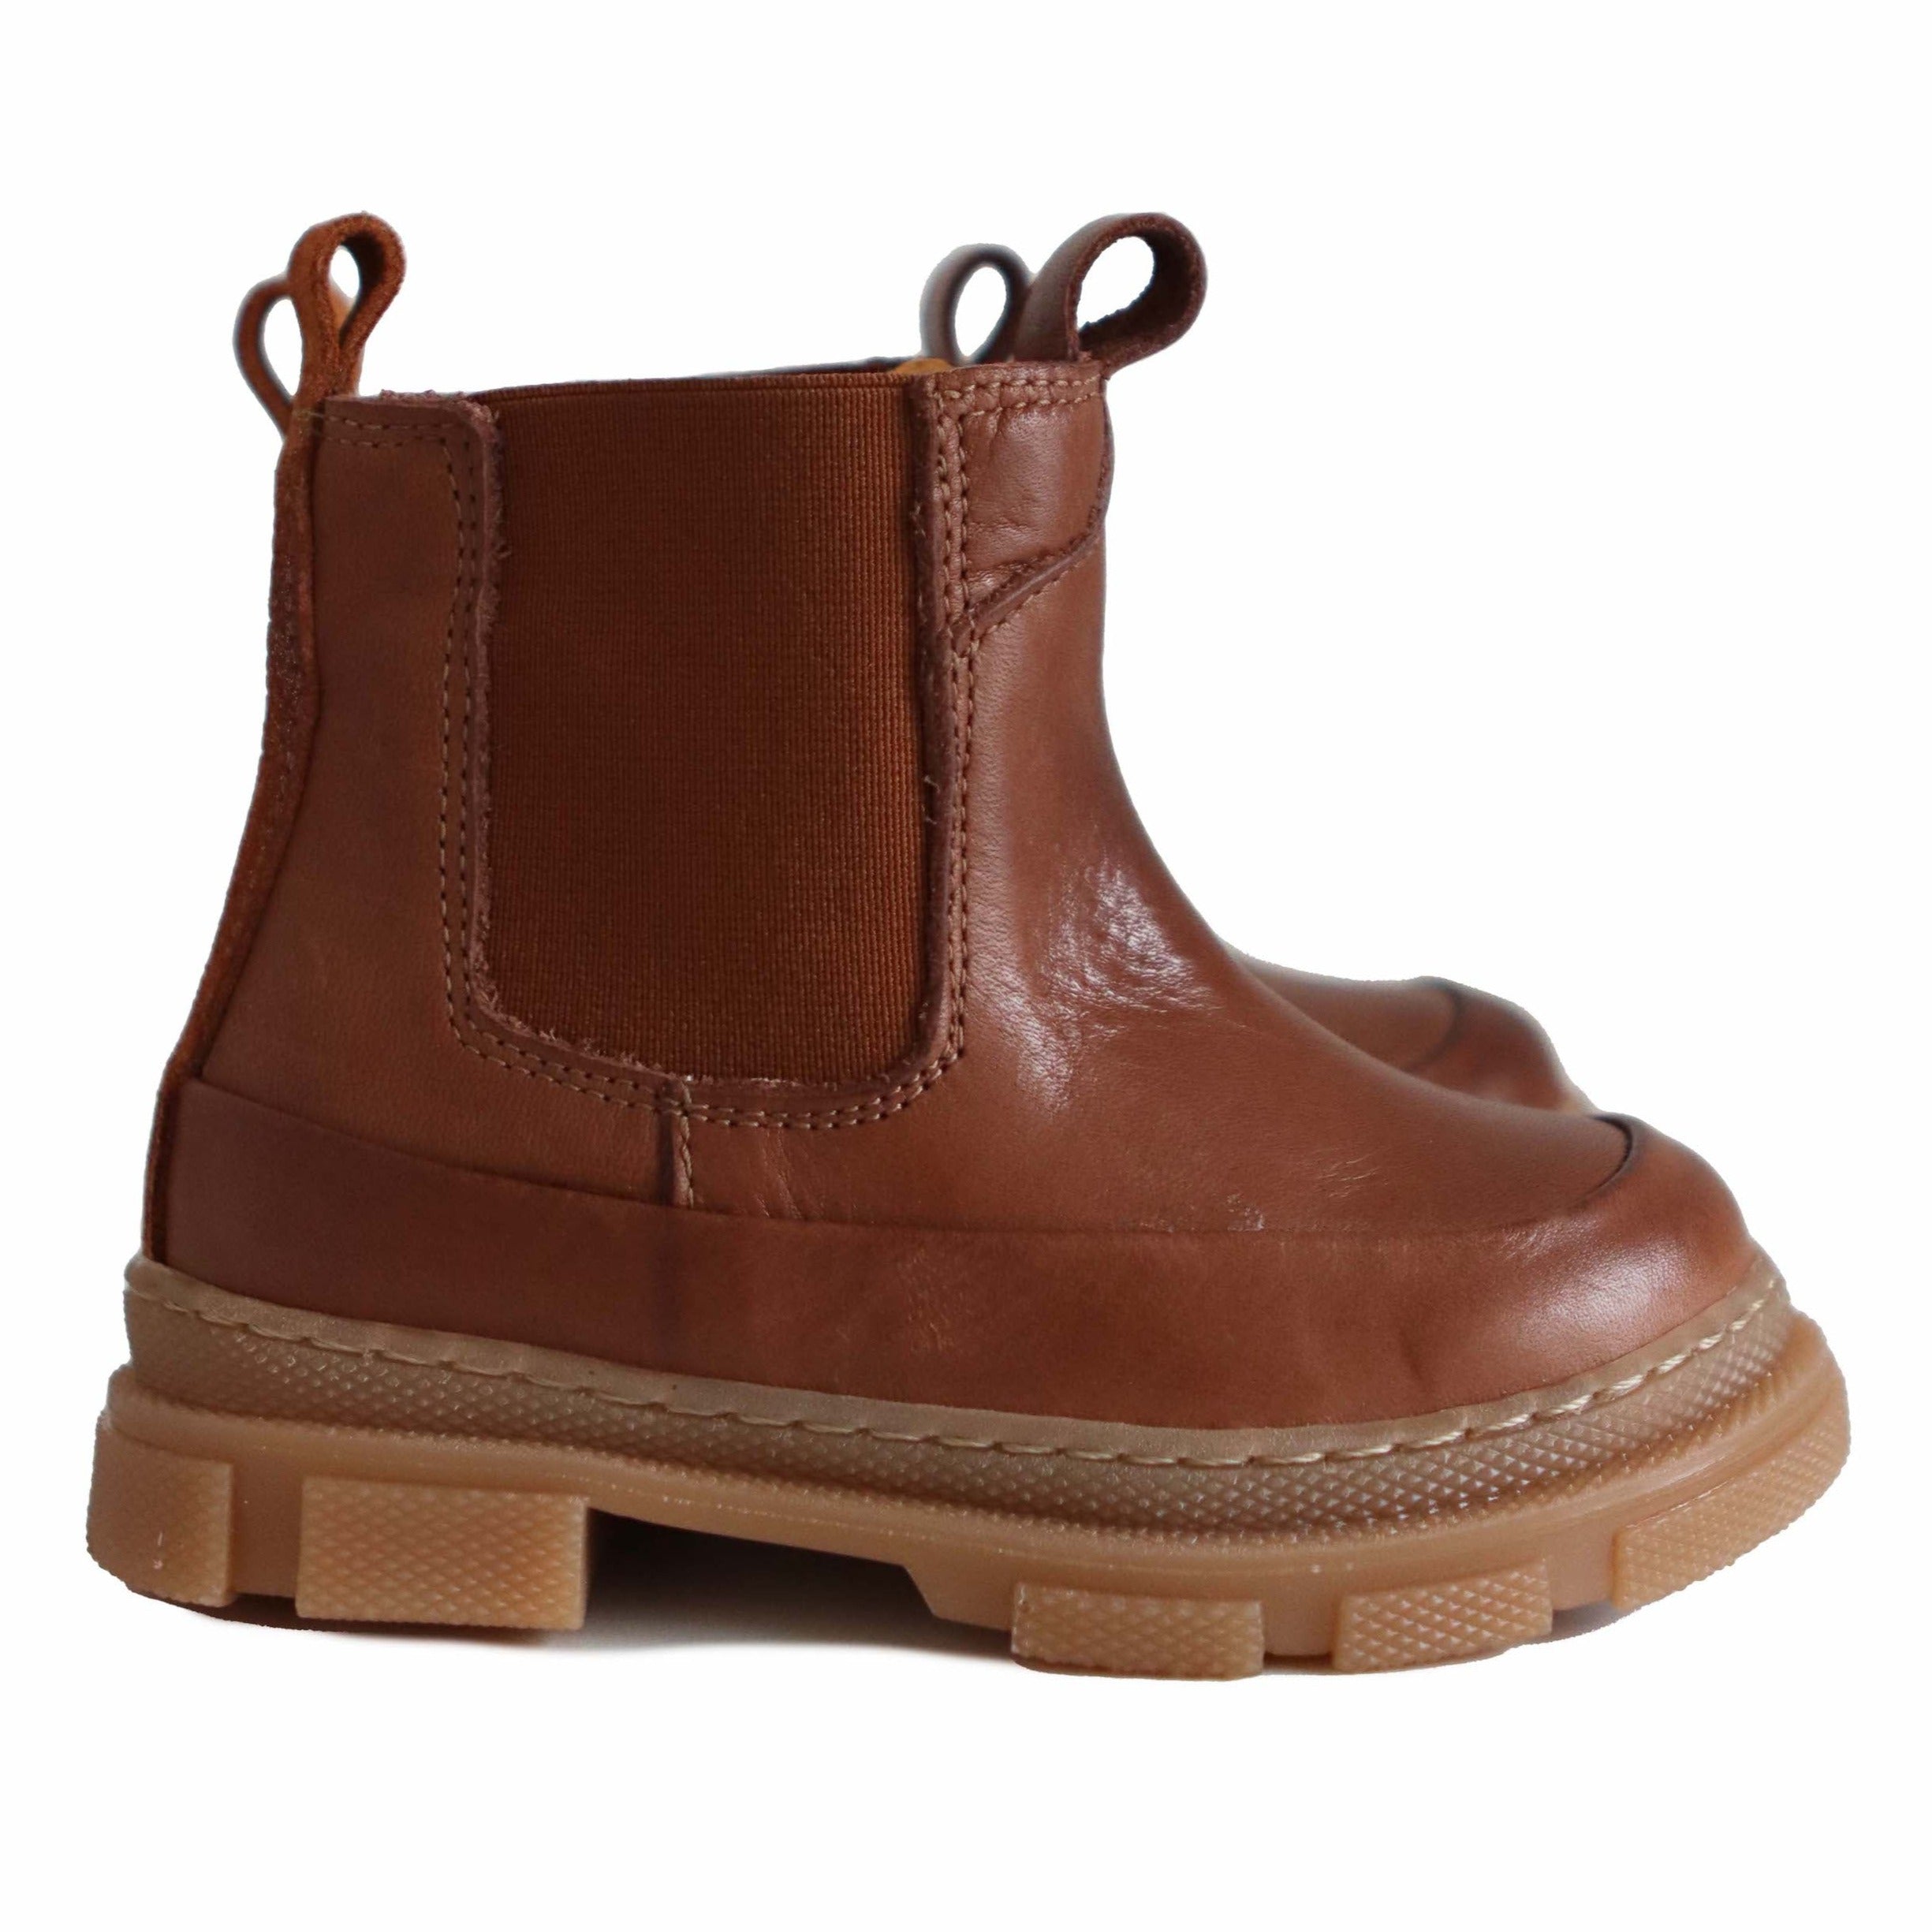 Pom - Sole Chunky Chelsea Boot, 26240 - Camel